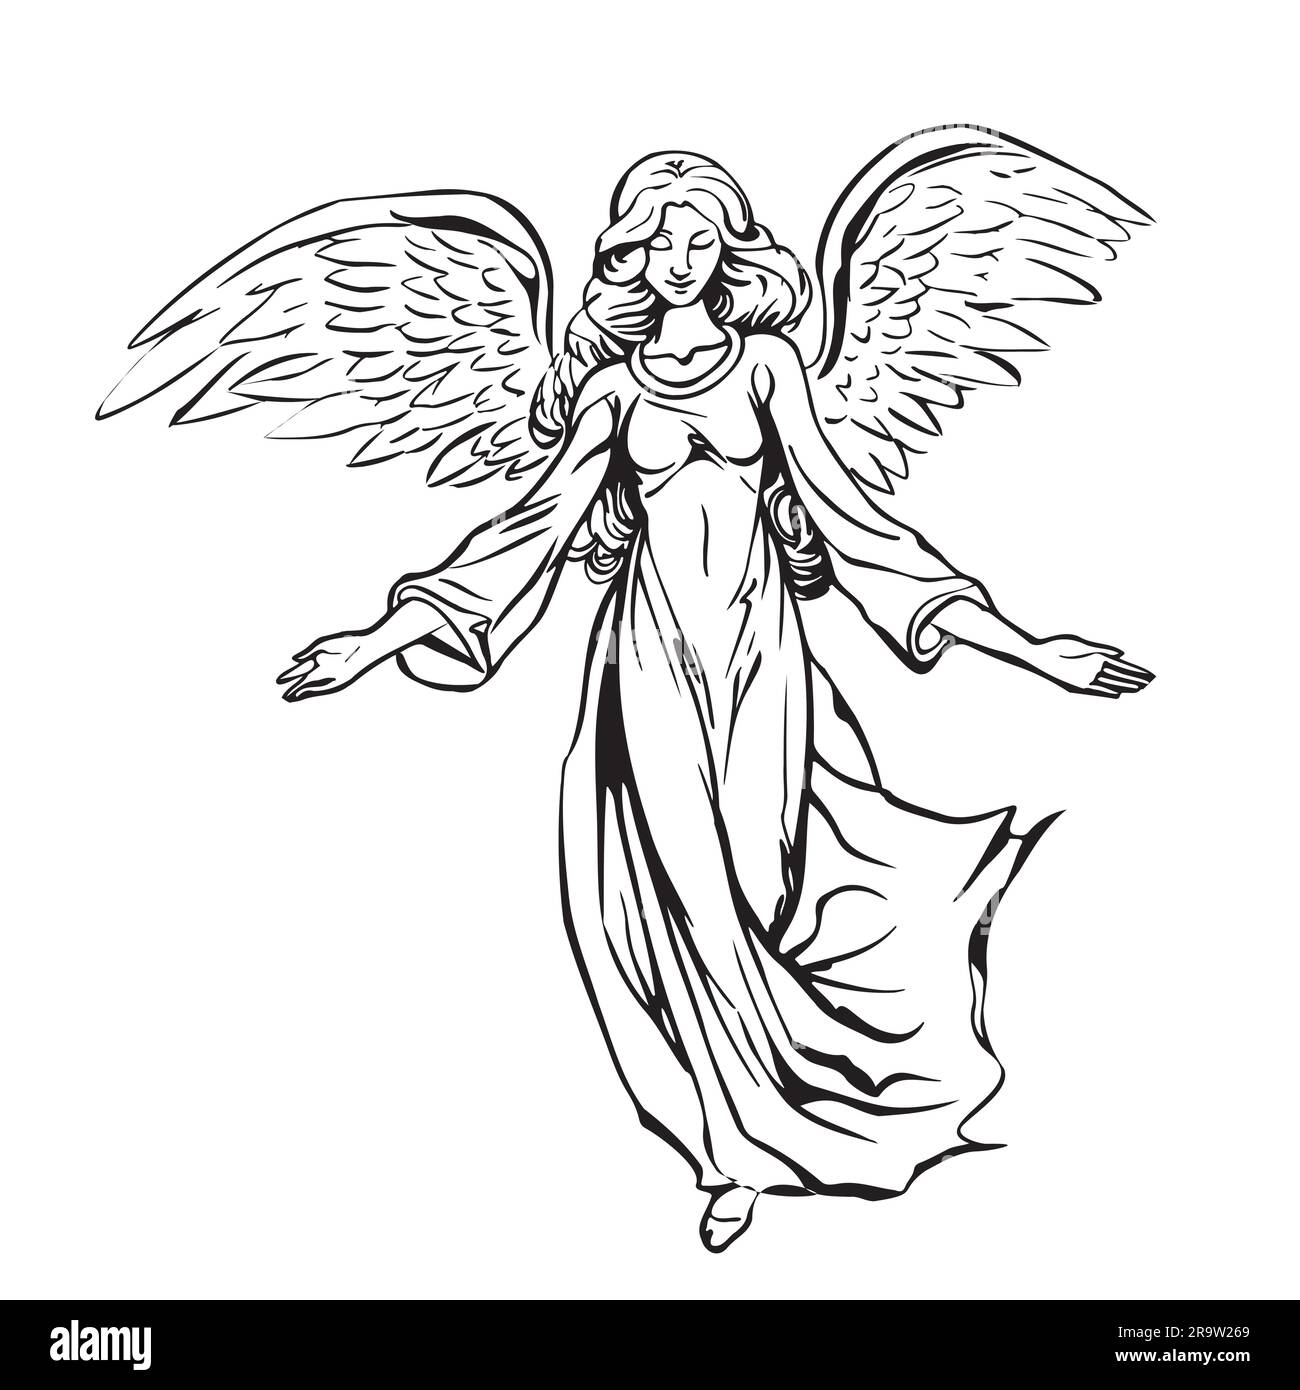 Angel girl with wings sketch hand drawn in doodle style illustration Stock Vector